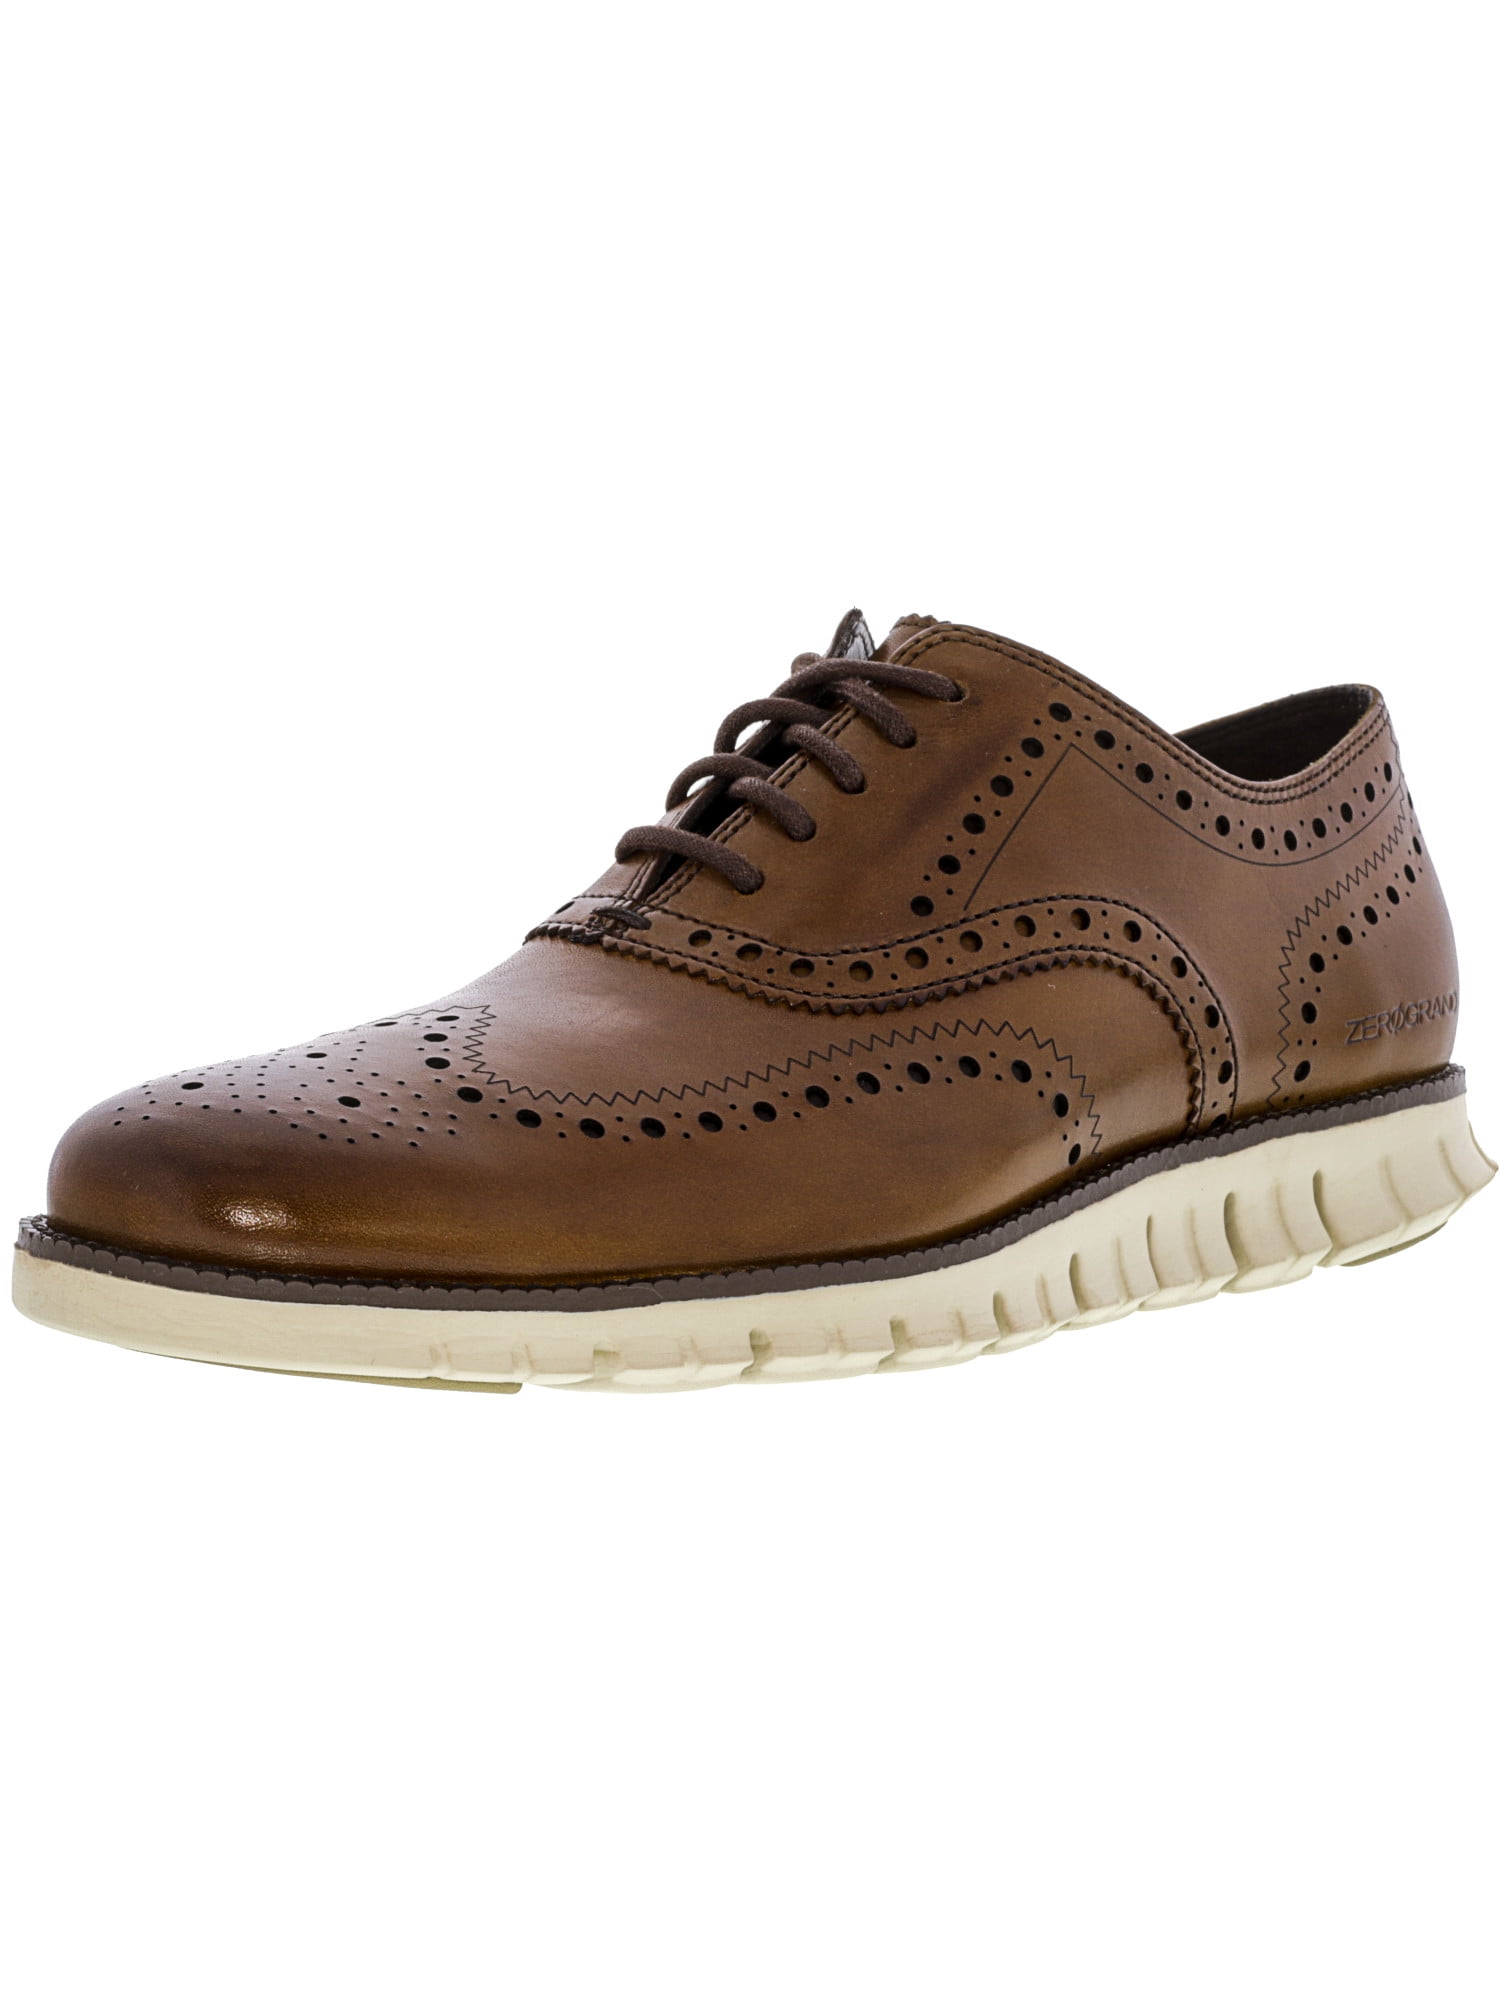 Cole Haan Men's Zerogrand Wing Oxford British Tan Ankle-High Leather ...